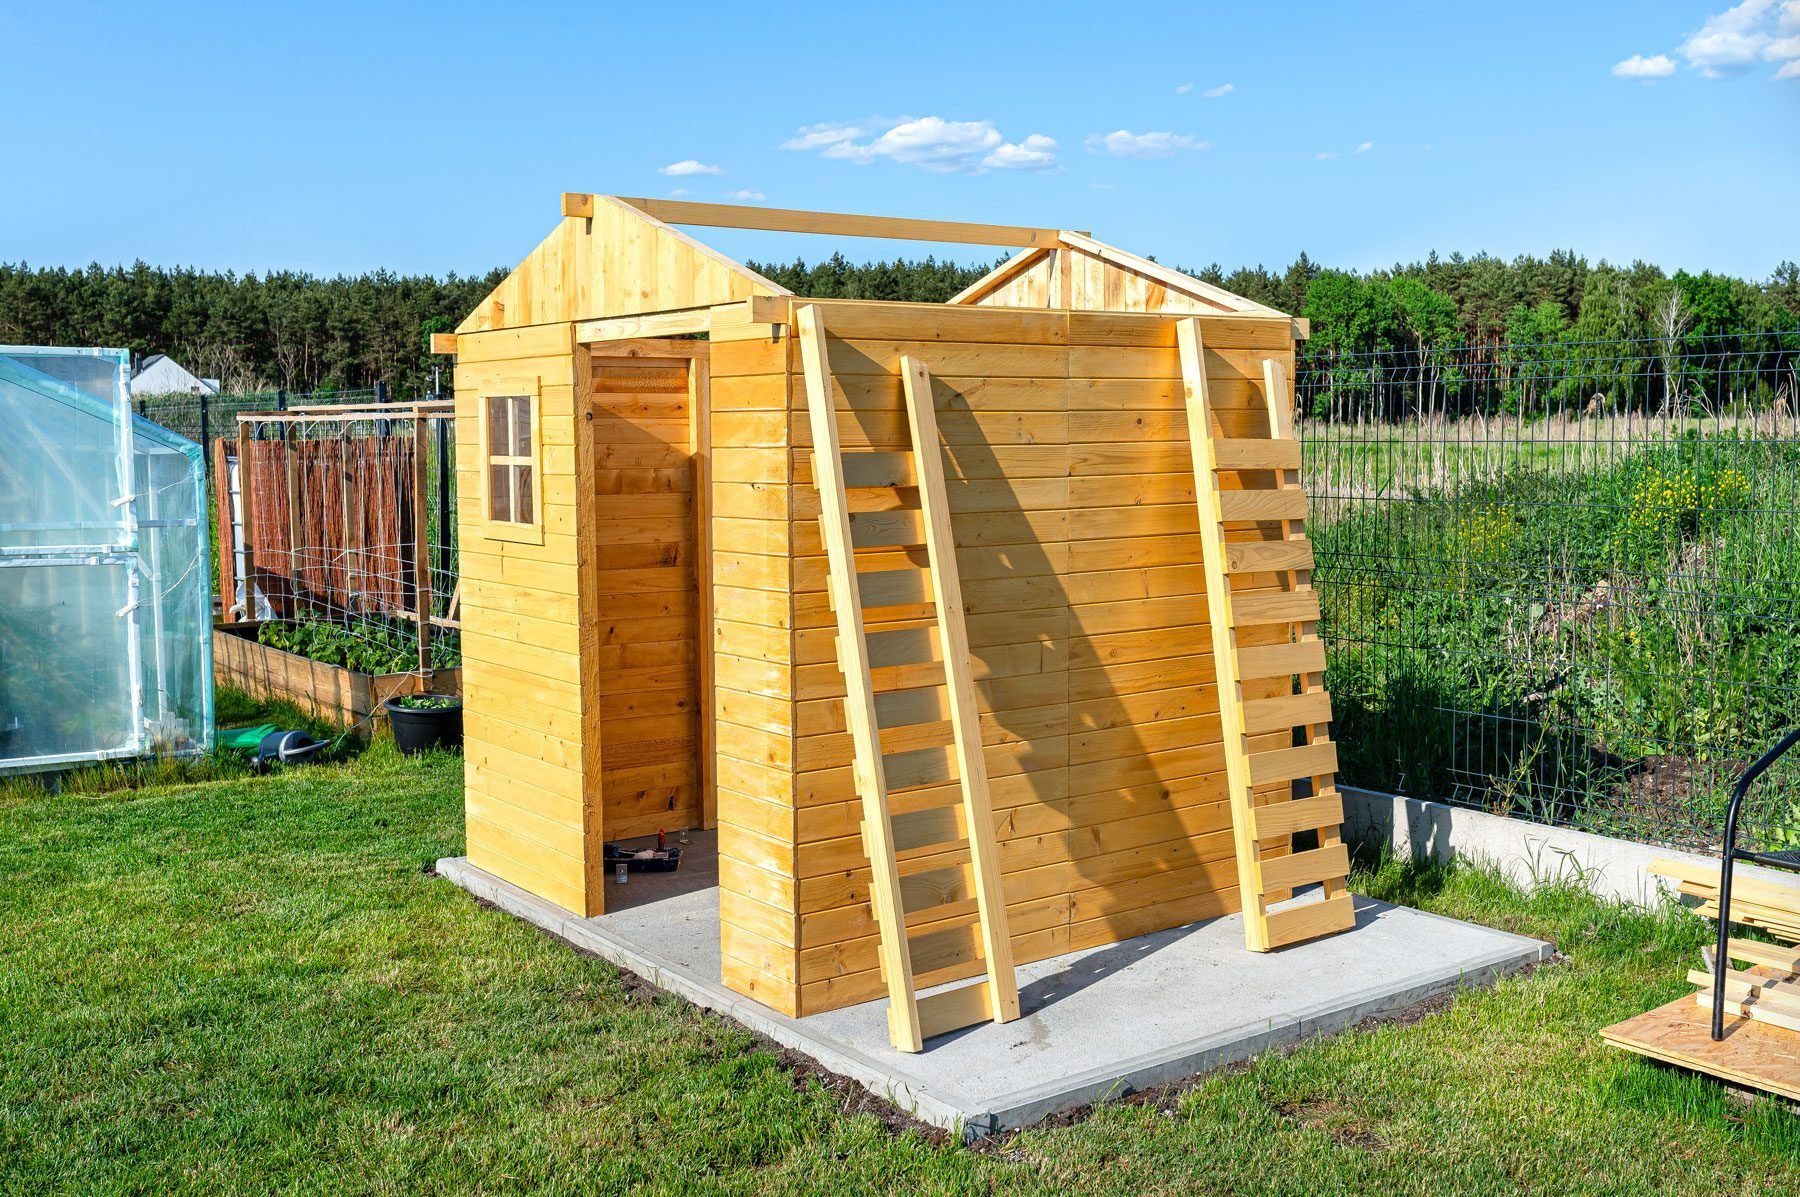 4 Best Types of Wood For Building a Shed